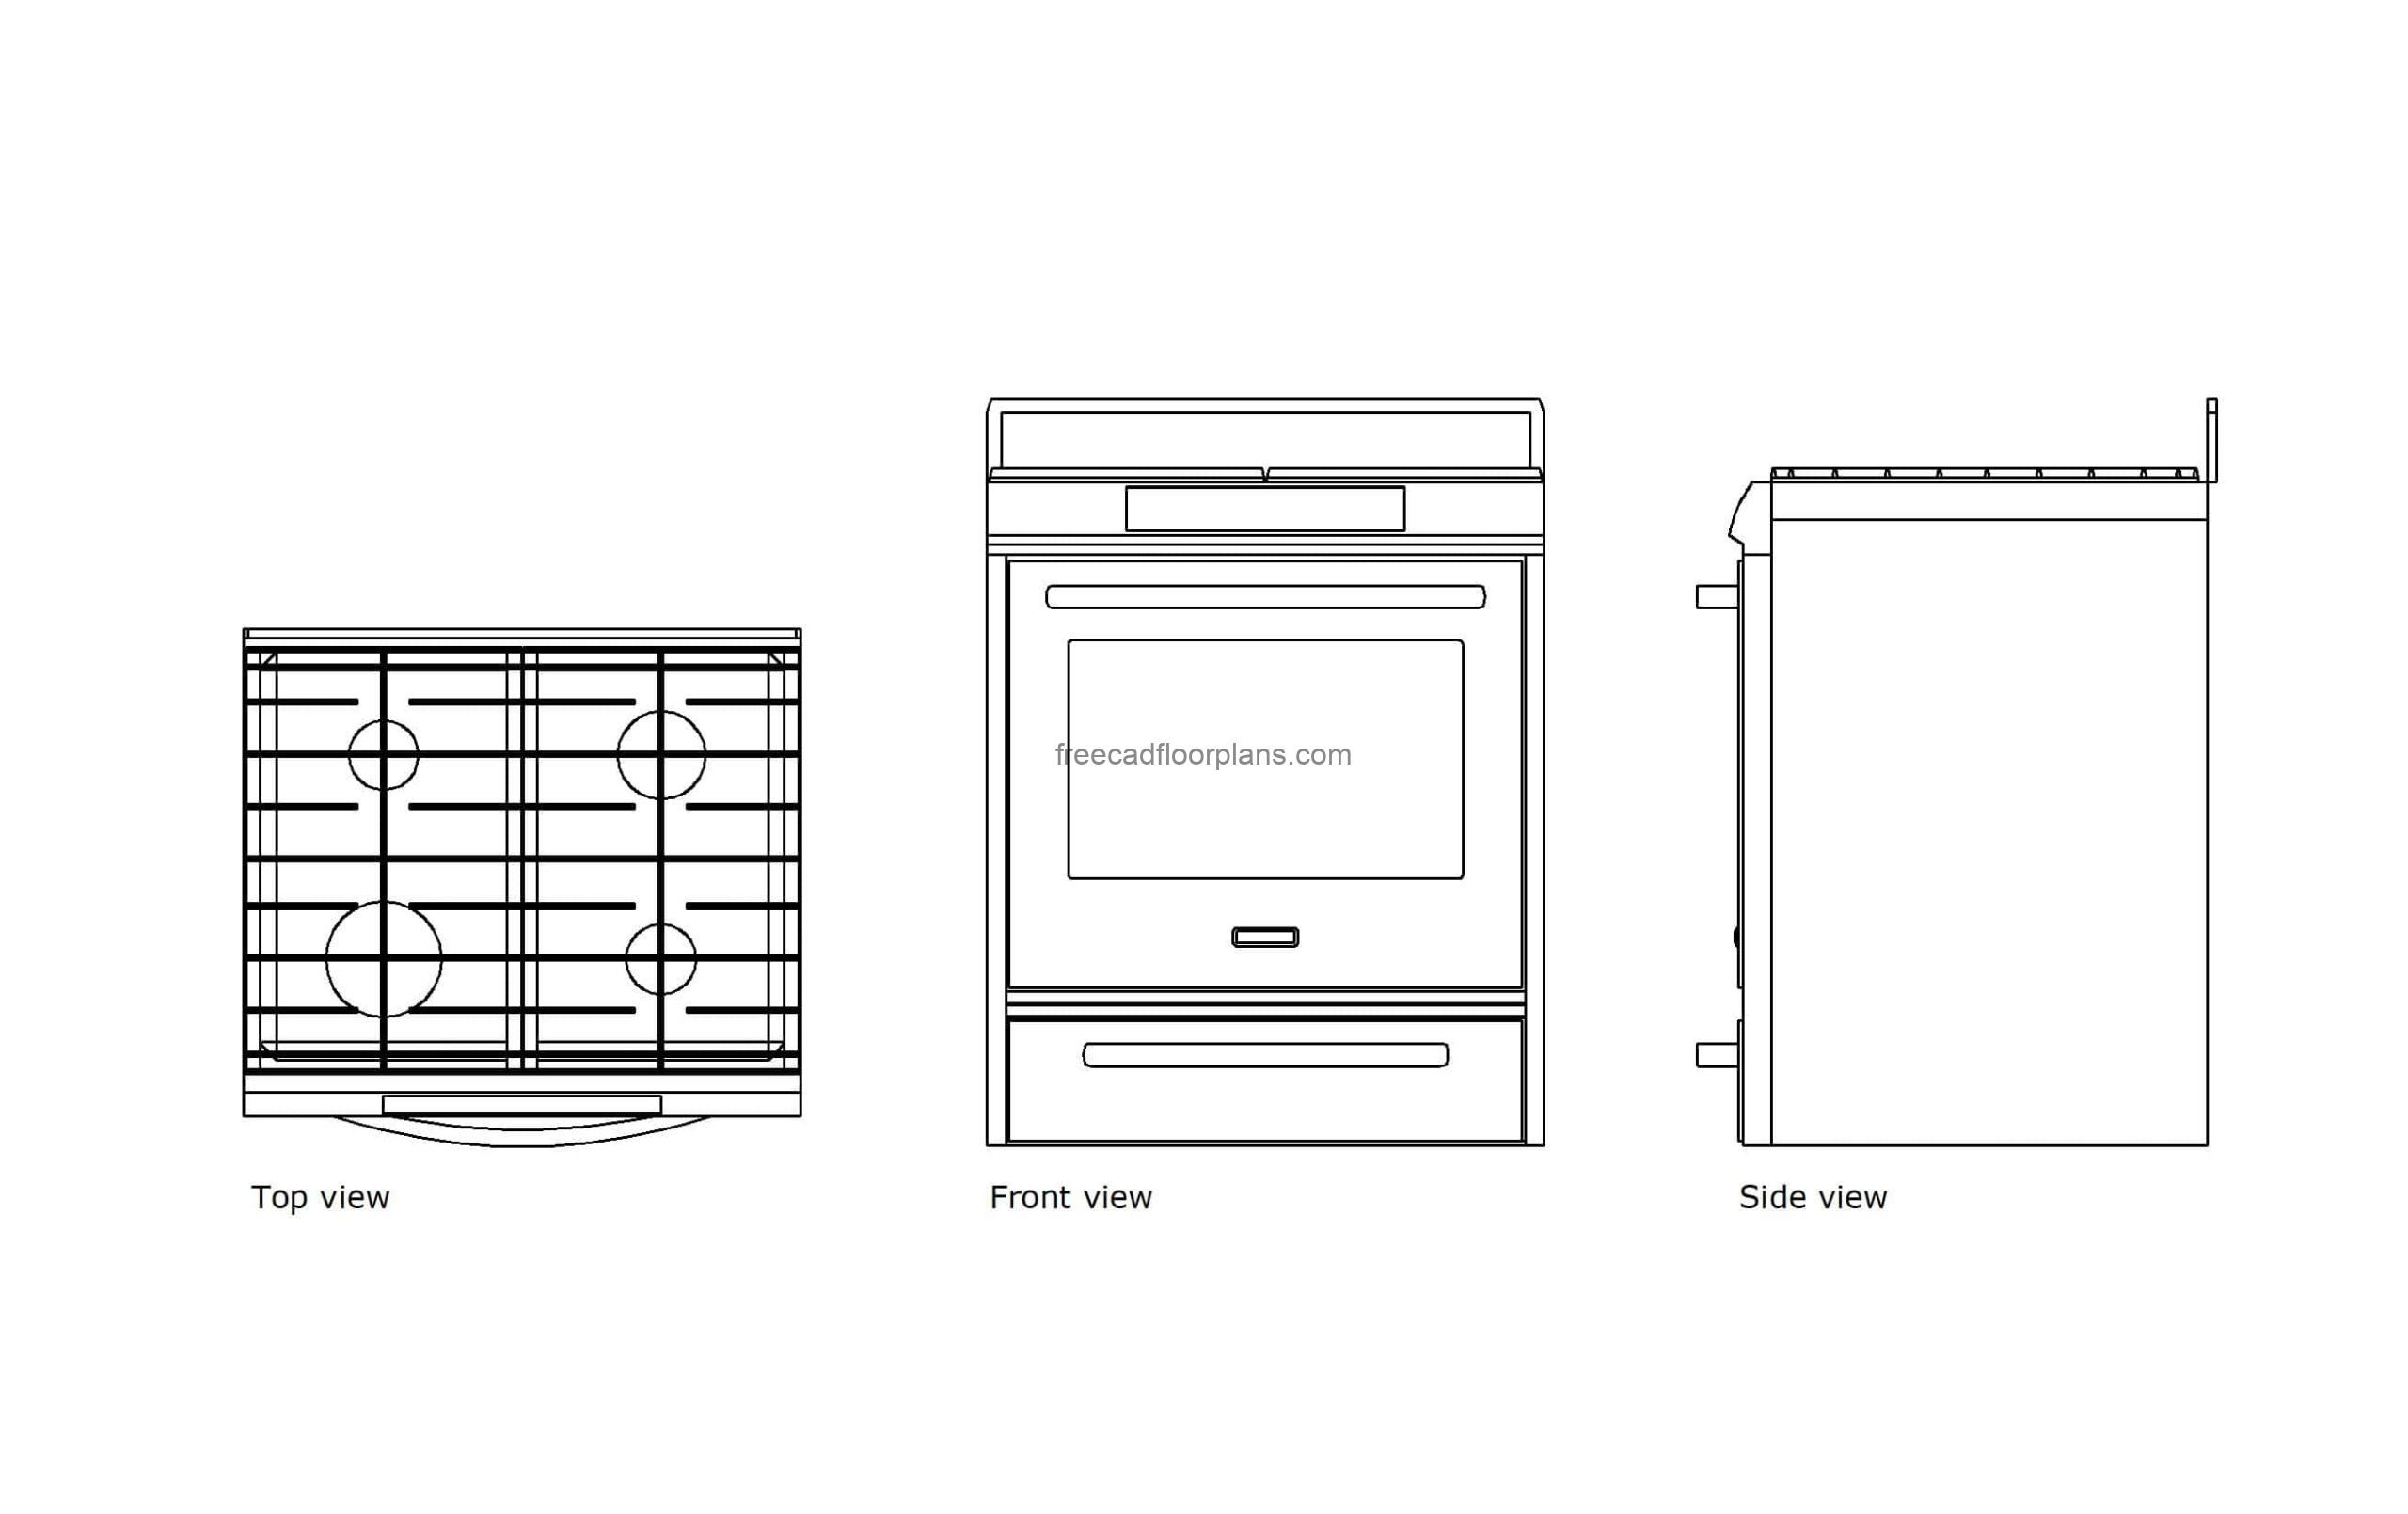 autocad drawing of a kitchen aid range, plan and elevation 2d views, dwg file free for download